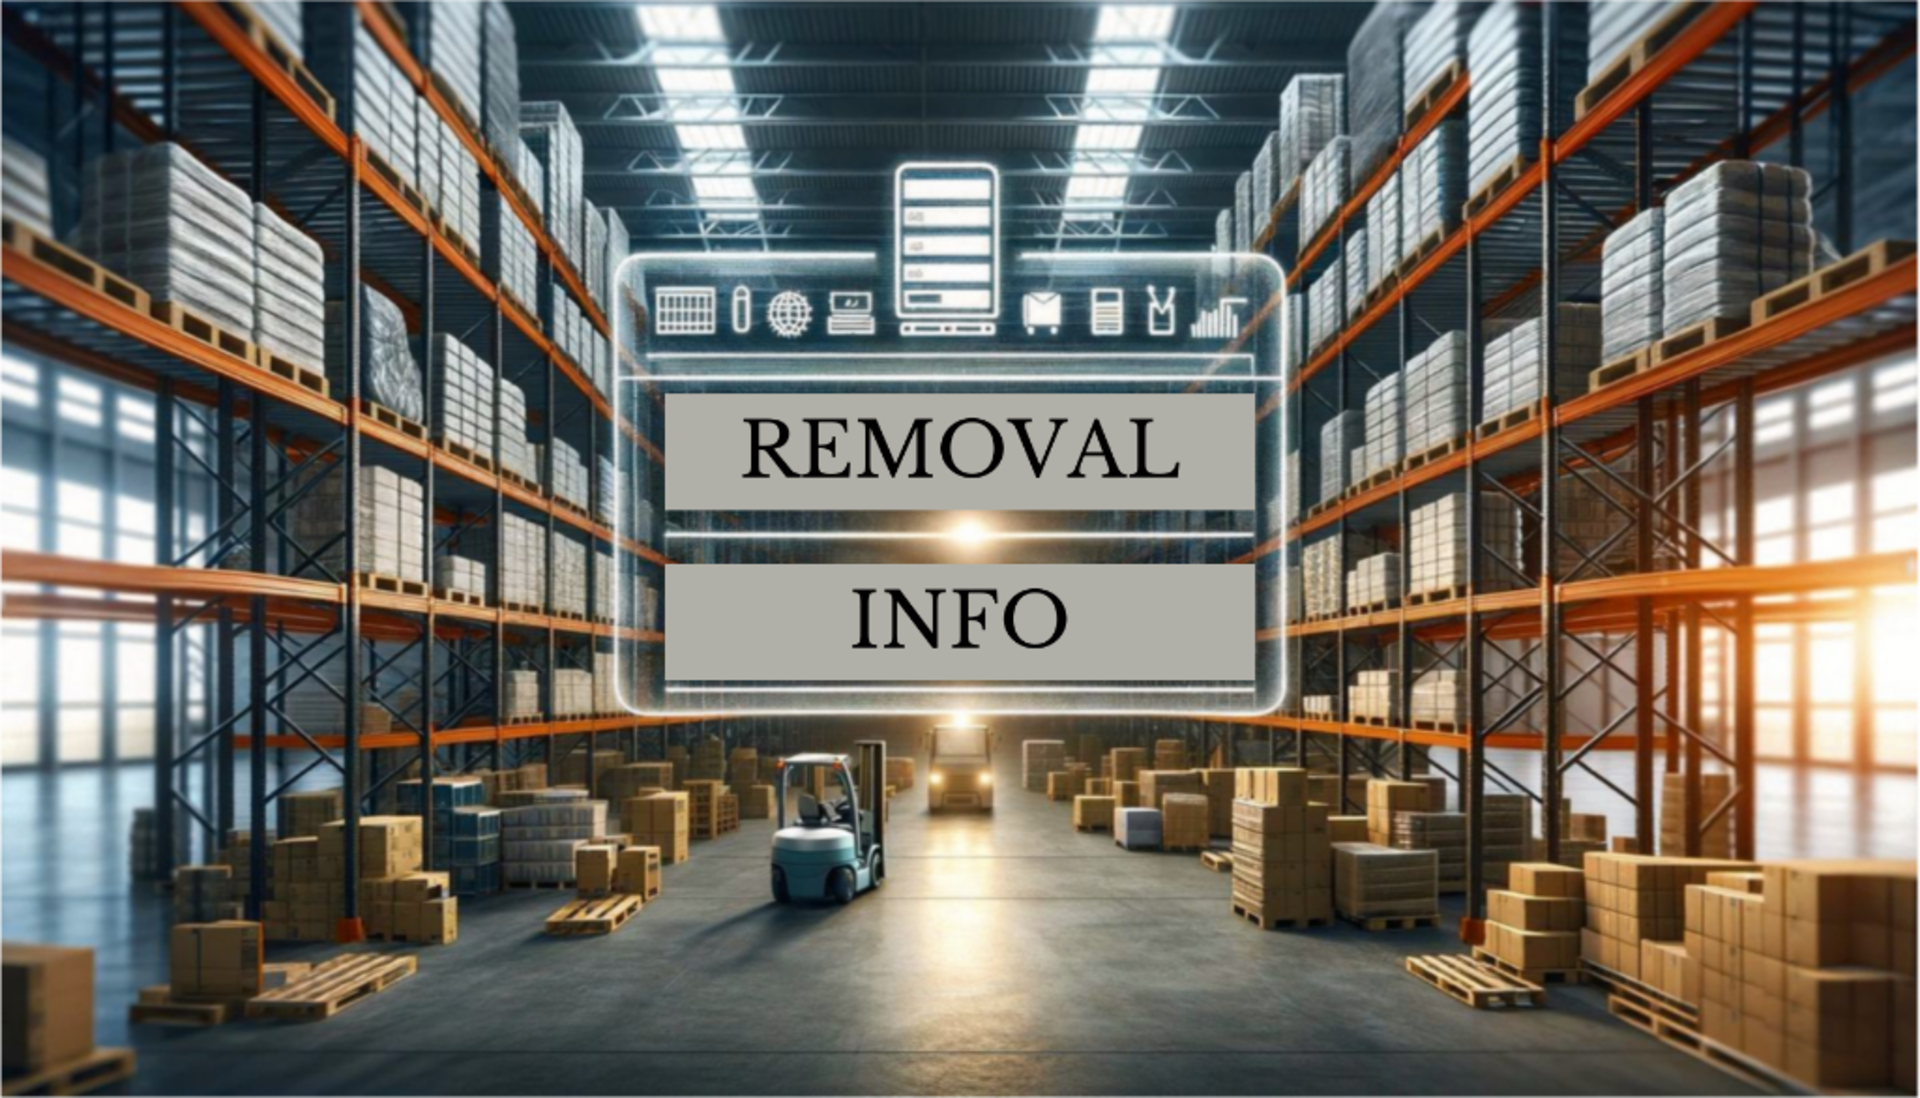 REMOVAL DETAILS: All items must be removed no later than 2 weeks after auction close. There is a rig